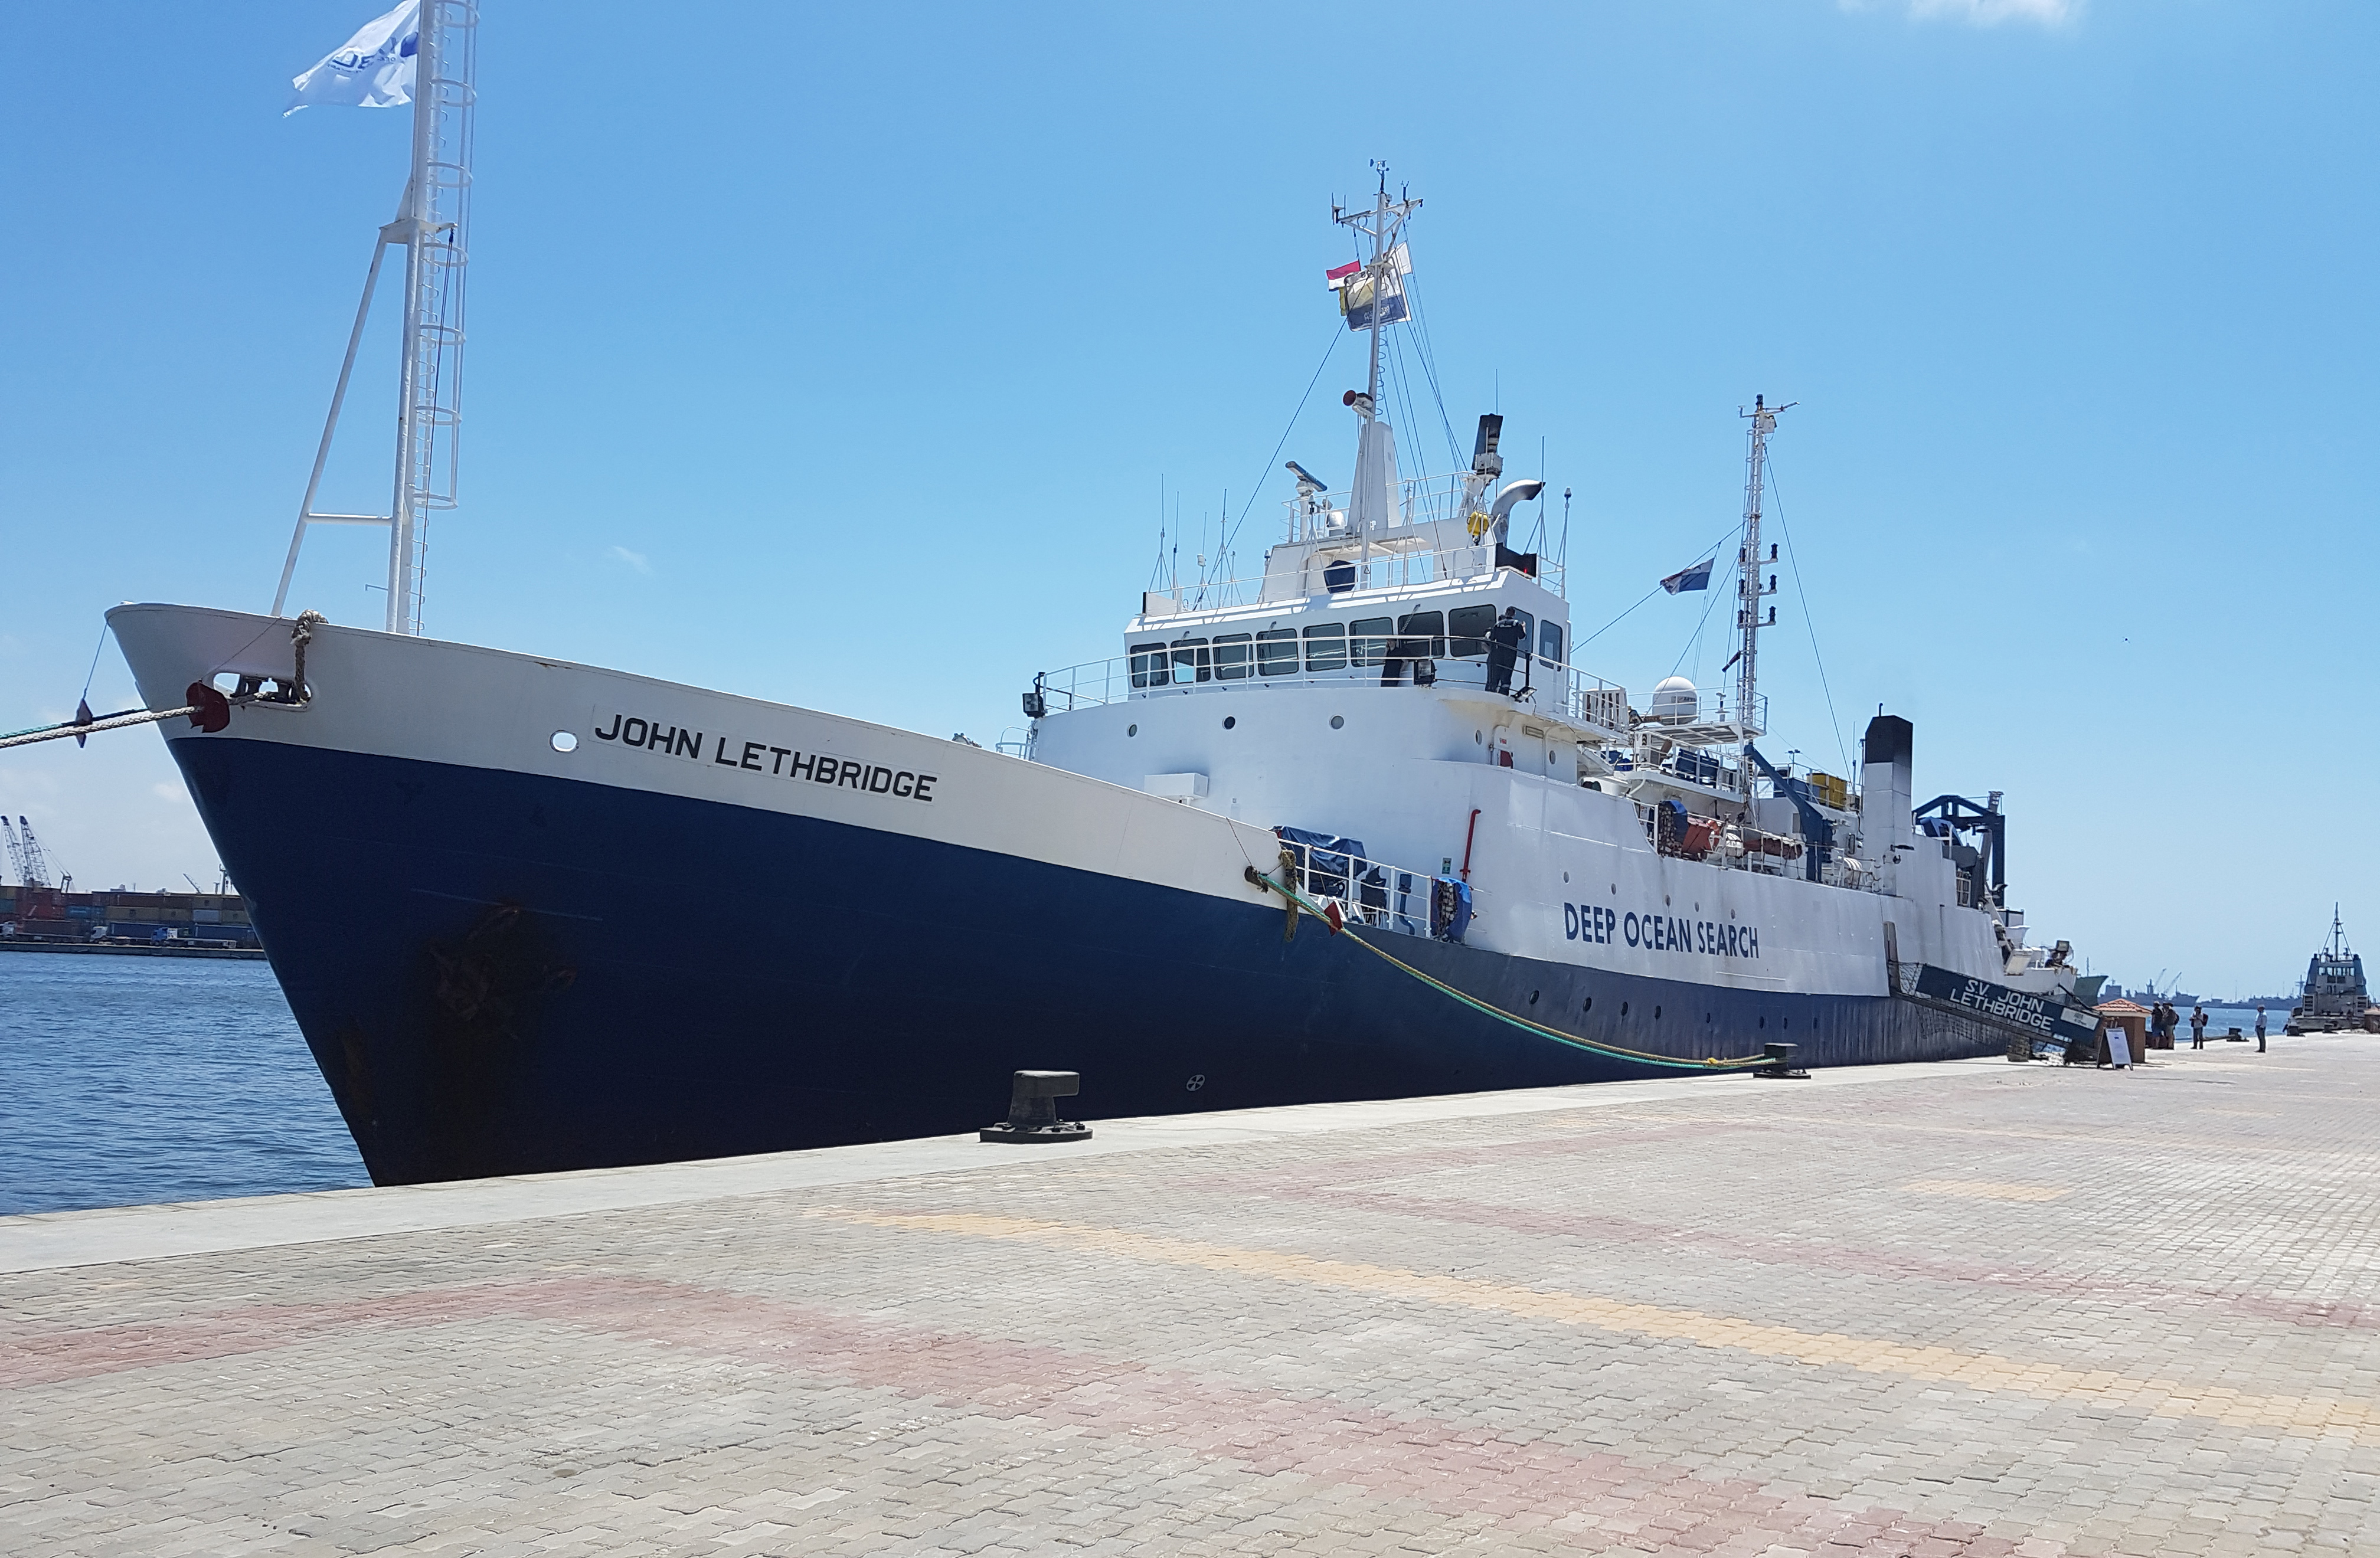 A handout picture provided on June 16, 2016, by Deep Ocean Search Ltd (DOS) shows the John Lethbridge research vessel moored in the port of Alexandria on June 9, 2016, after it arrived in Egypt to begin searching the Mediterranean for the wreck of the EgyptAir Airbus A320 that crashed on May 19. A search team of the John Lethbridge on June 16, 2016, recovered the cockpit voice recorder from the EgyptAir plane, in a major step towards establishing the cause of the tragedy. / AFP PHOTO / DEEP OCEAN SEARCH LTD / F.BASSEMAYOUSSE / RESTRICTED TO EDITORIAL USE - MANDATORY CREDIT "AFP PHOTO / HO / DEEP OCEAN SEARCH LTD" - NO MARKETING NO ADVERTISING CAMPAIGNS - DISTRIBUTED AS A SERVICE TO CLIENTS